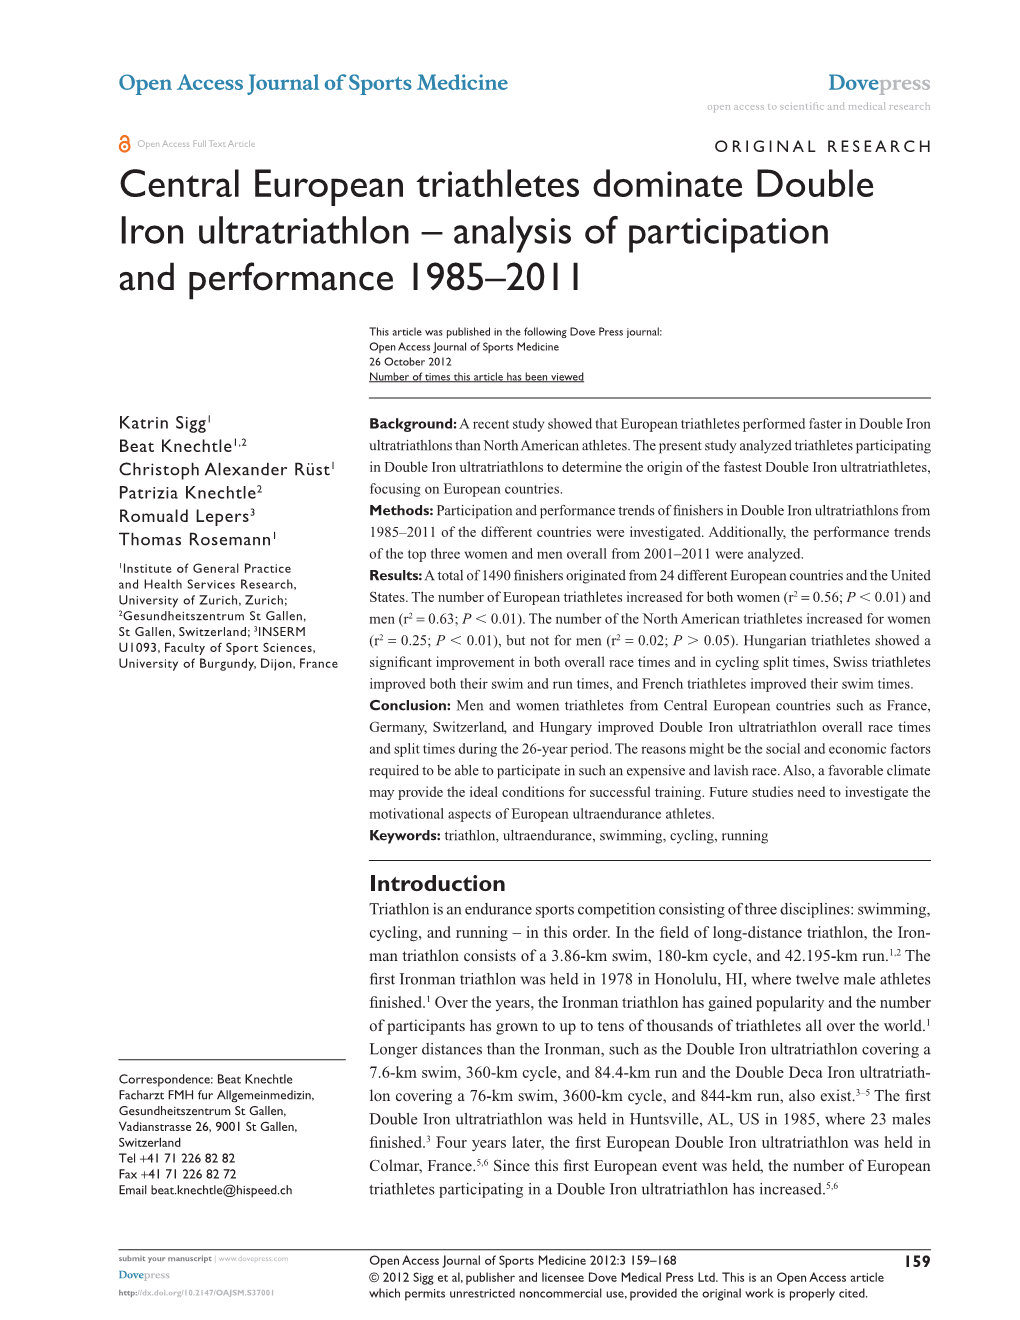 Central European Triathletes Dominate Double Iron Ultratriathlon – Analysis of Participation and Performance 1985–2011